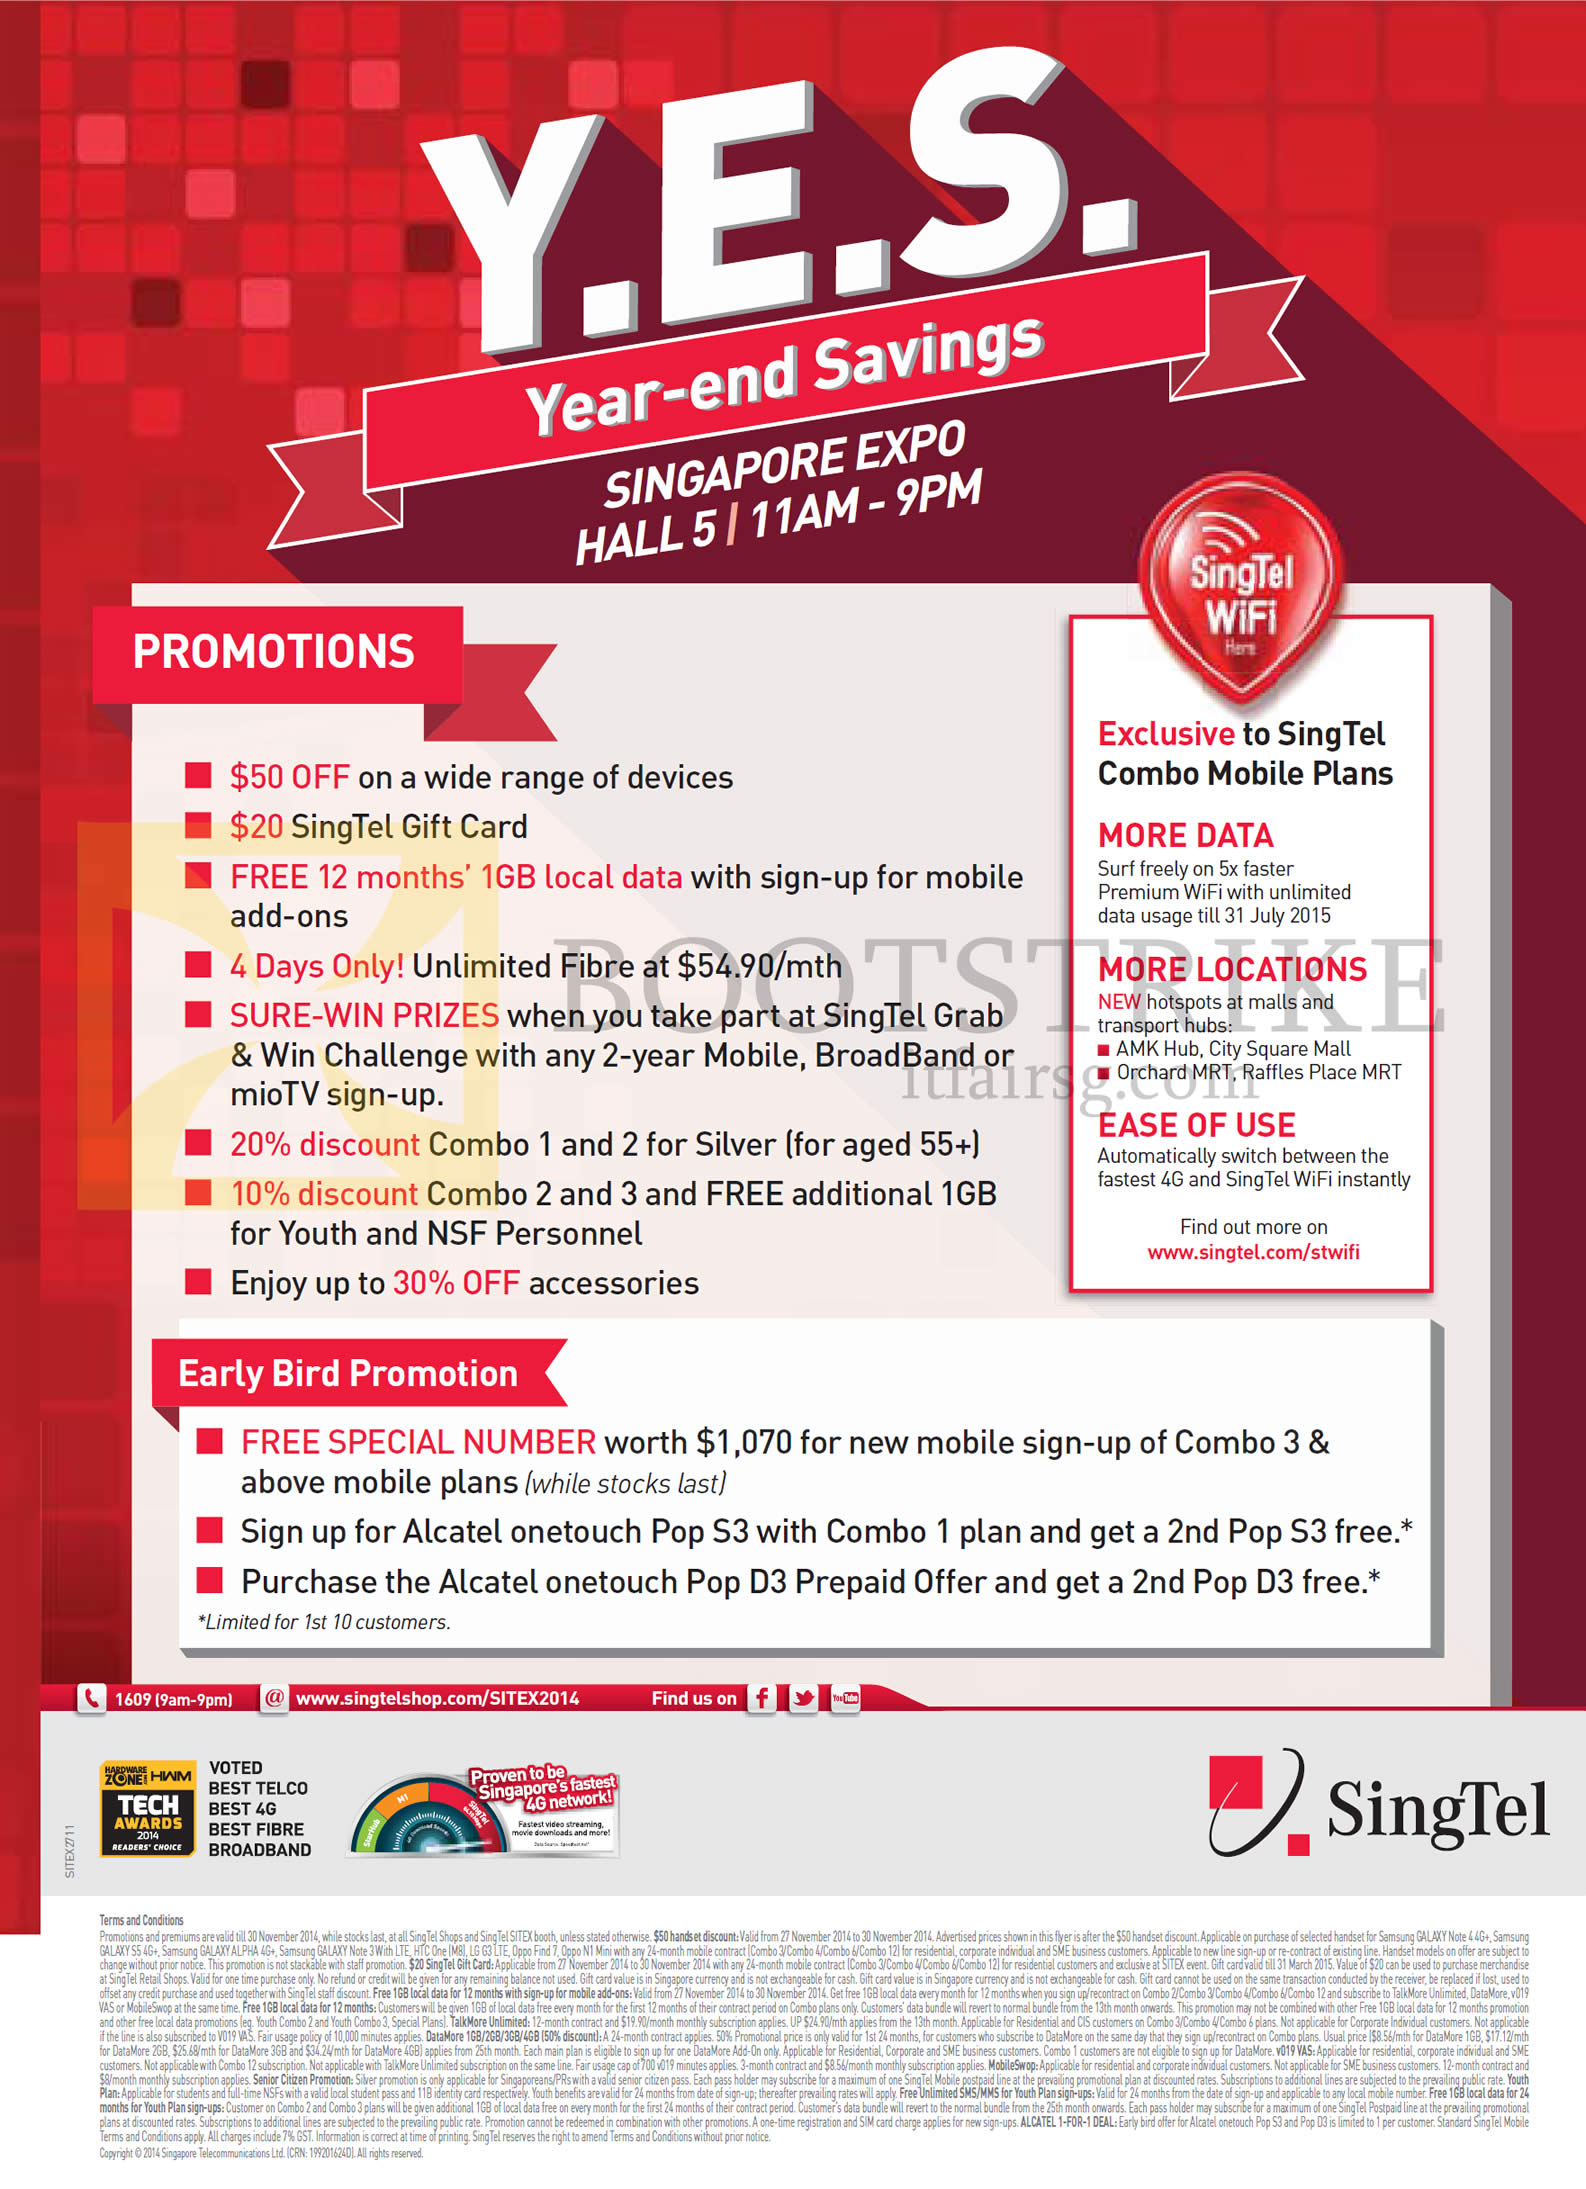 SITEX 2014 price list image brochure of Singtel Highlights Promotions, Early Bird Promotion